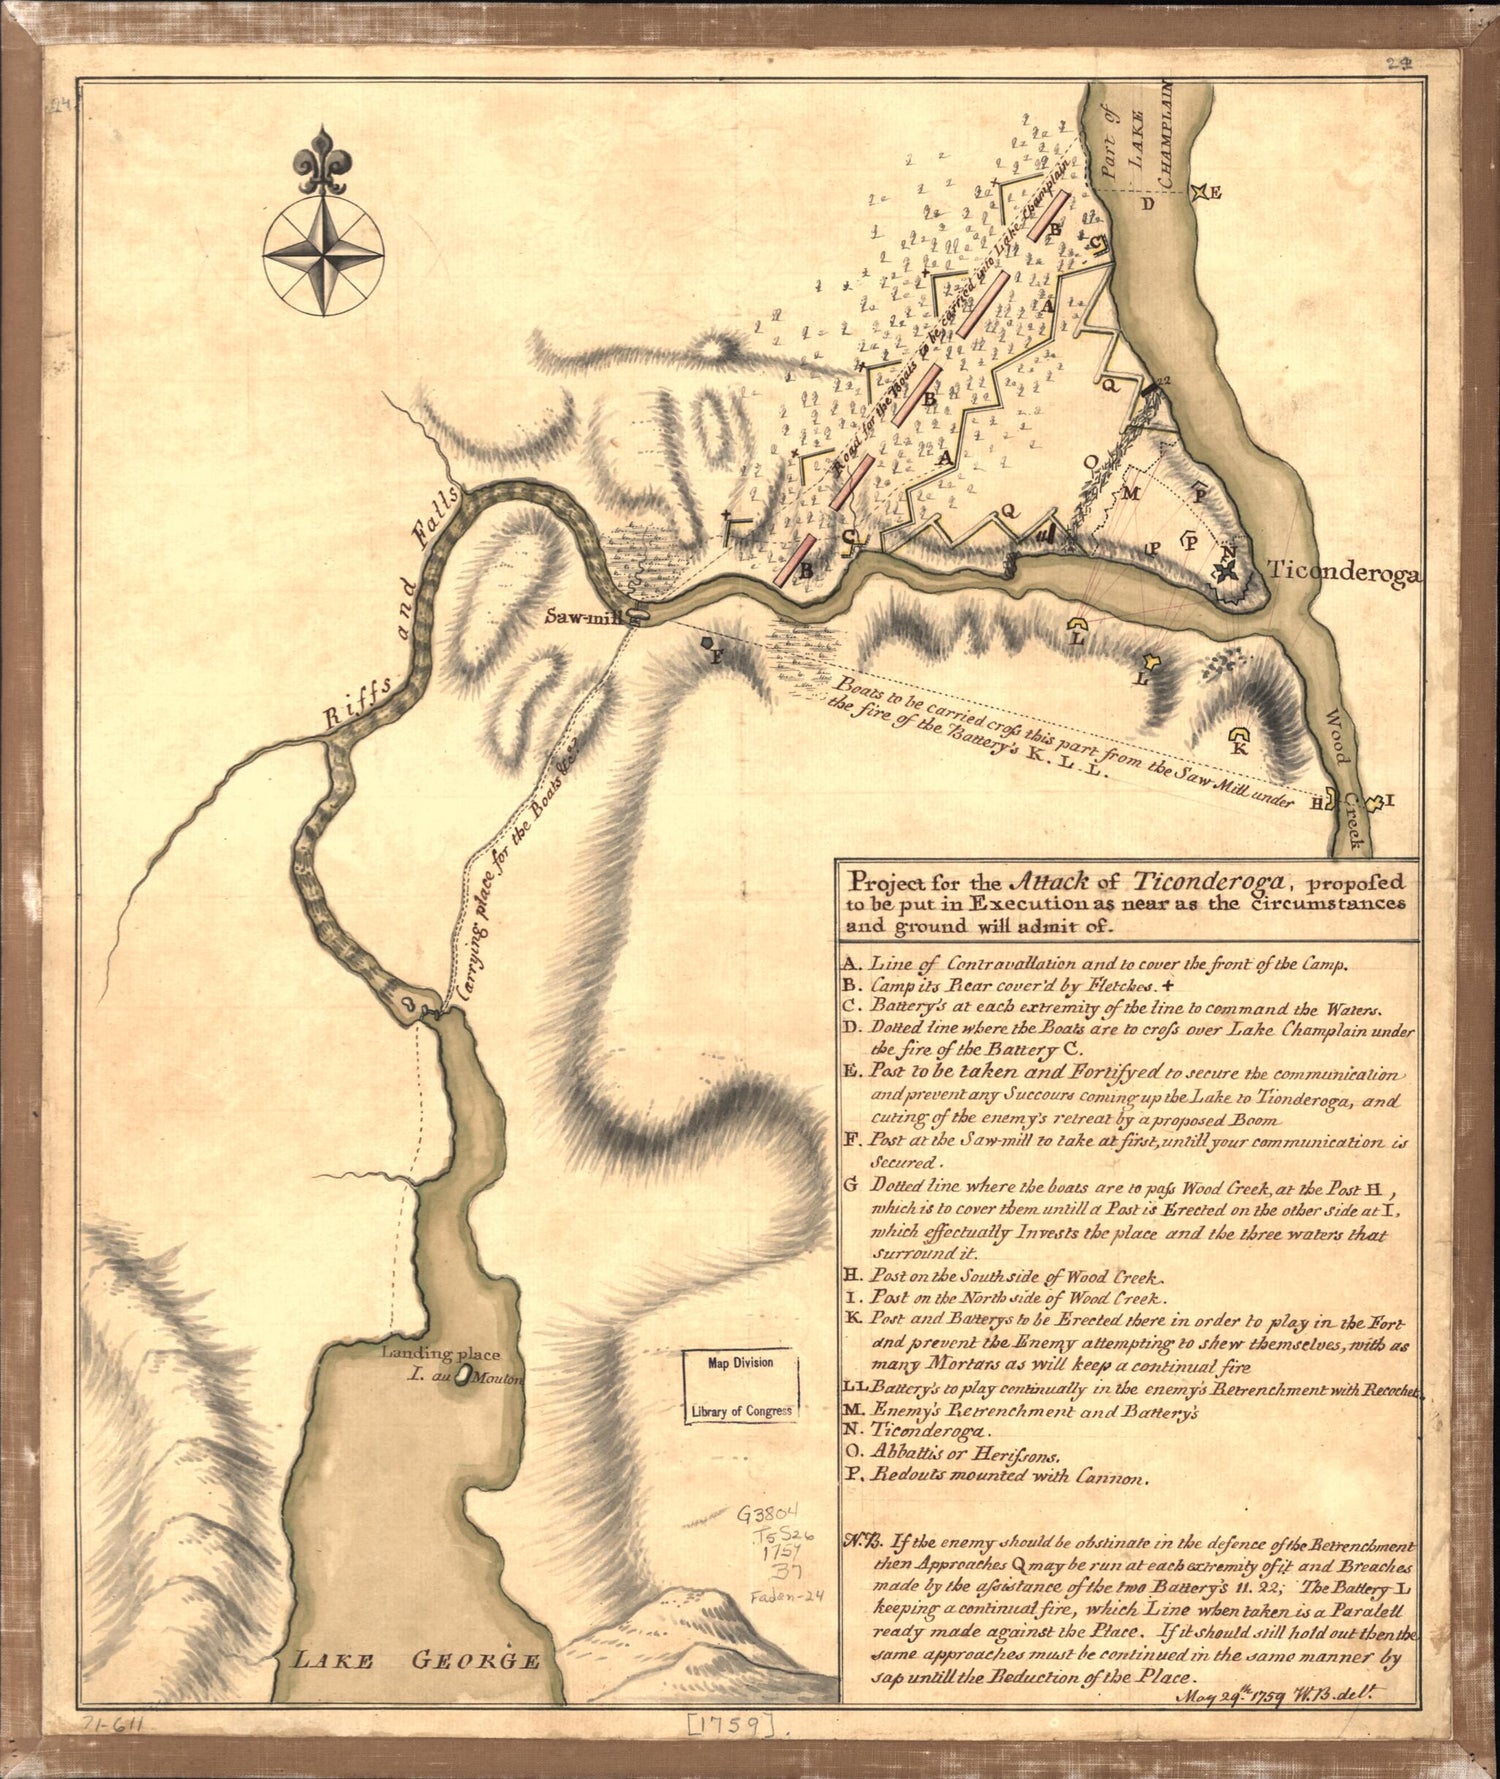 This old map of Project for the Attack of Ticonderoga, Proposed to Be Put In Execution As Near As the Circumstances and Ground Will Admit Of. May 29th. from 1759 was created by William Brasier in 1759